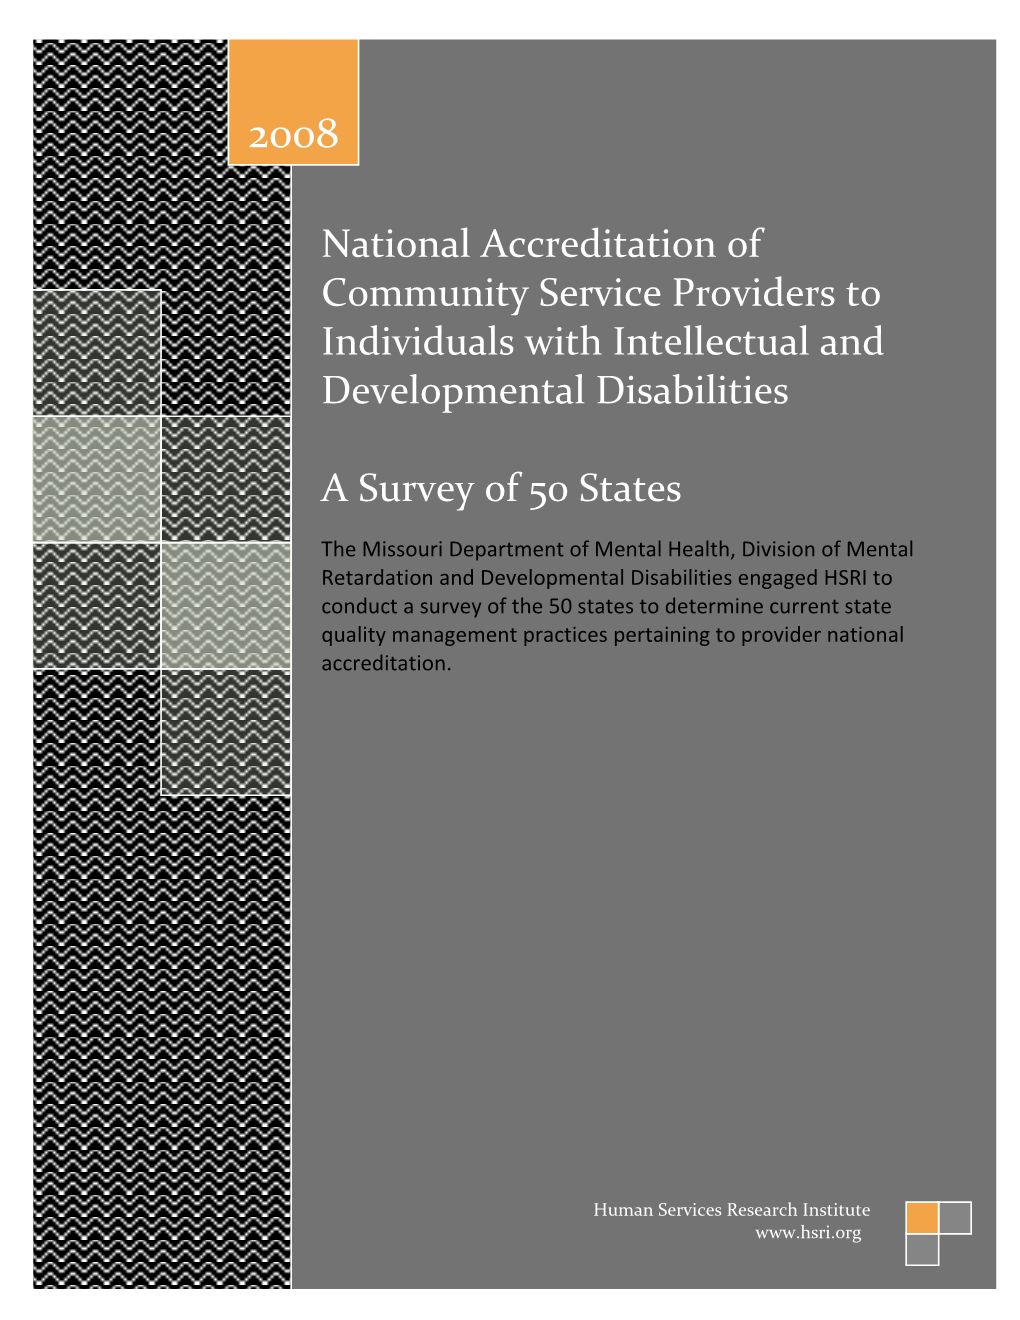 National Accreditation of Community Providers of Services to Individuals with Intellectual